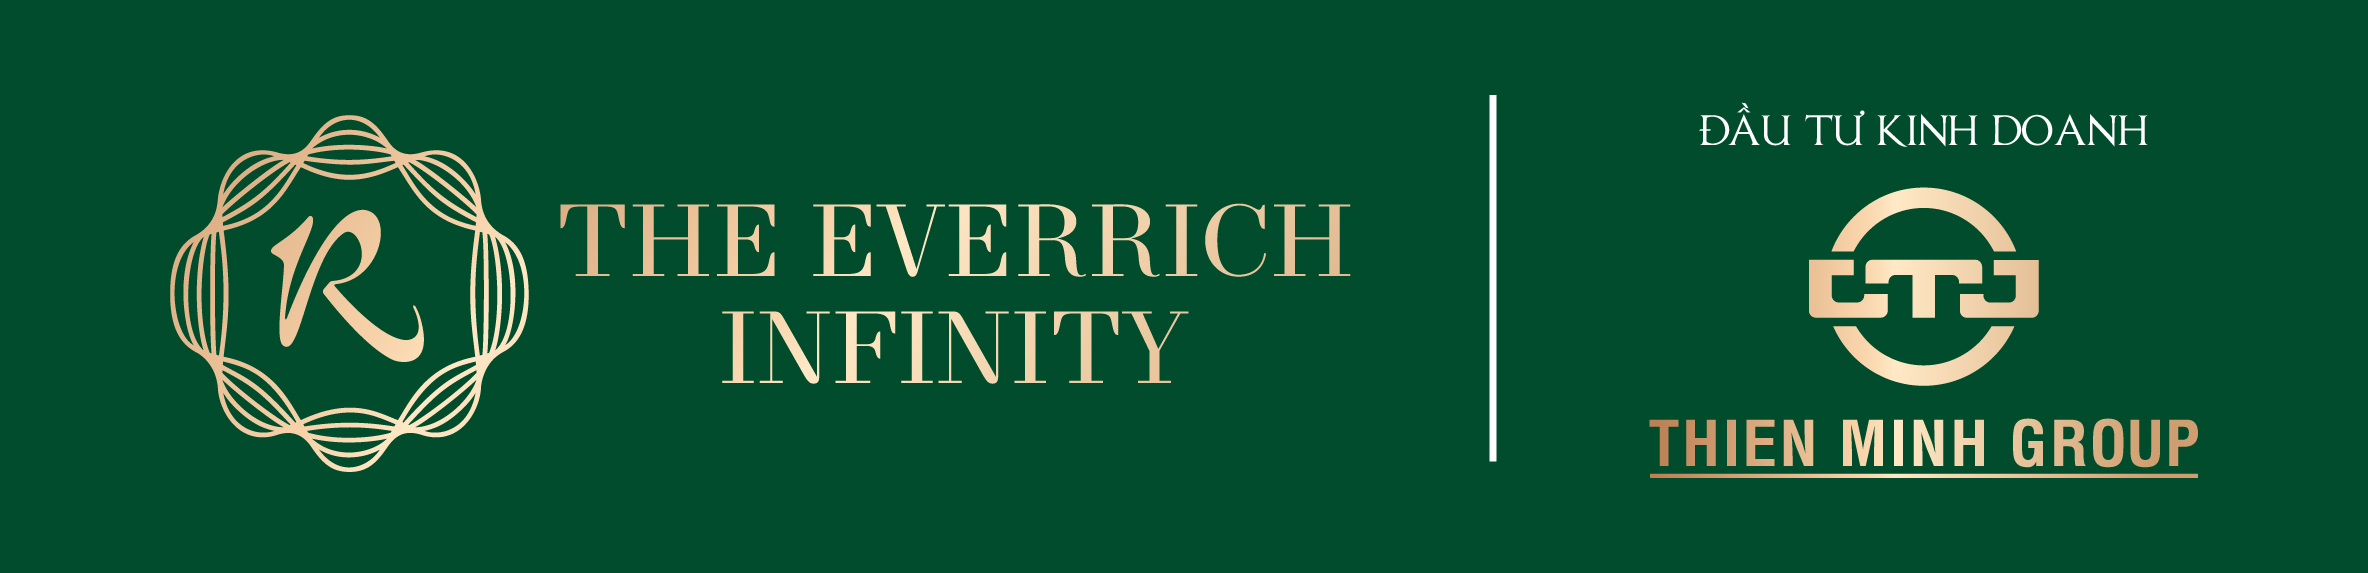 The EverRich Infinity